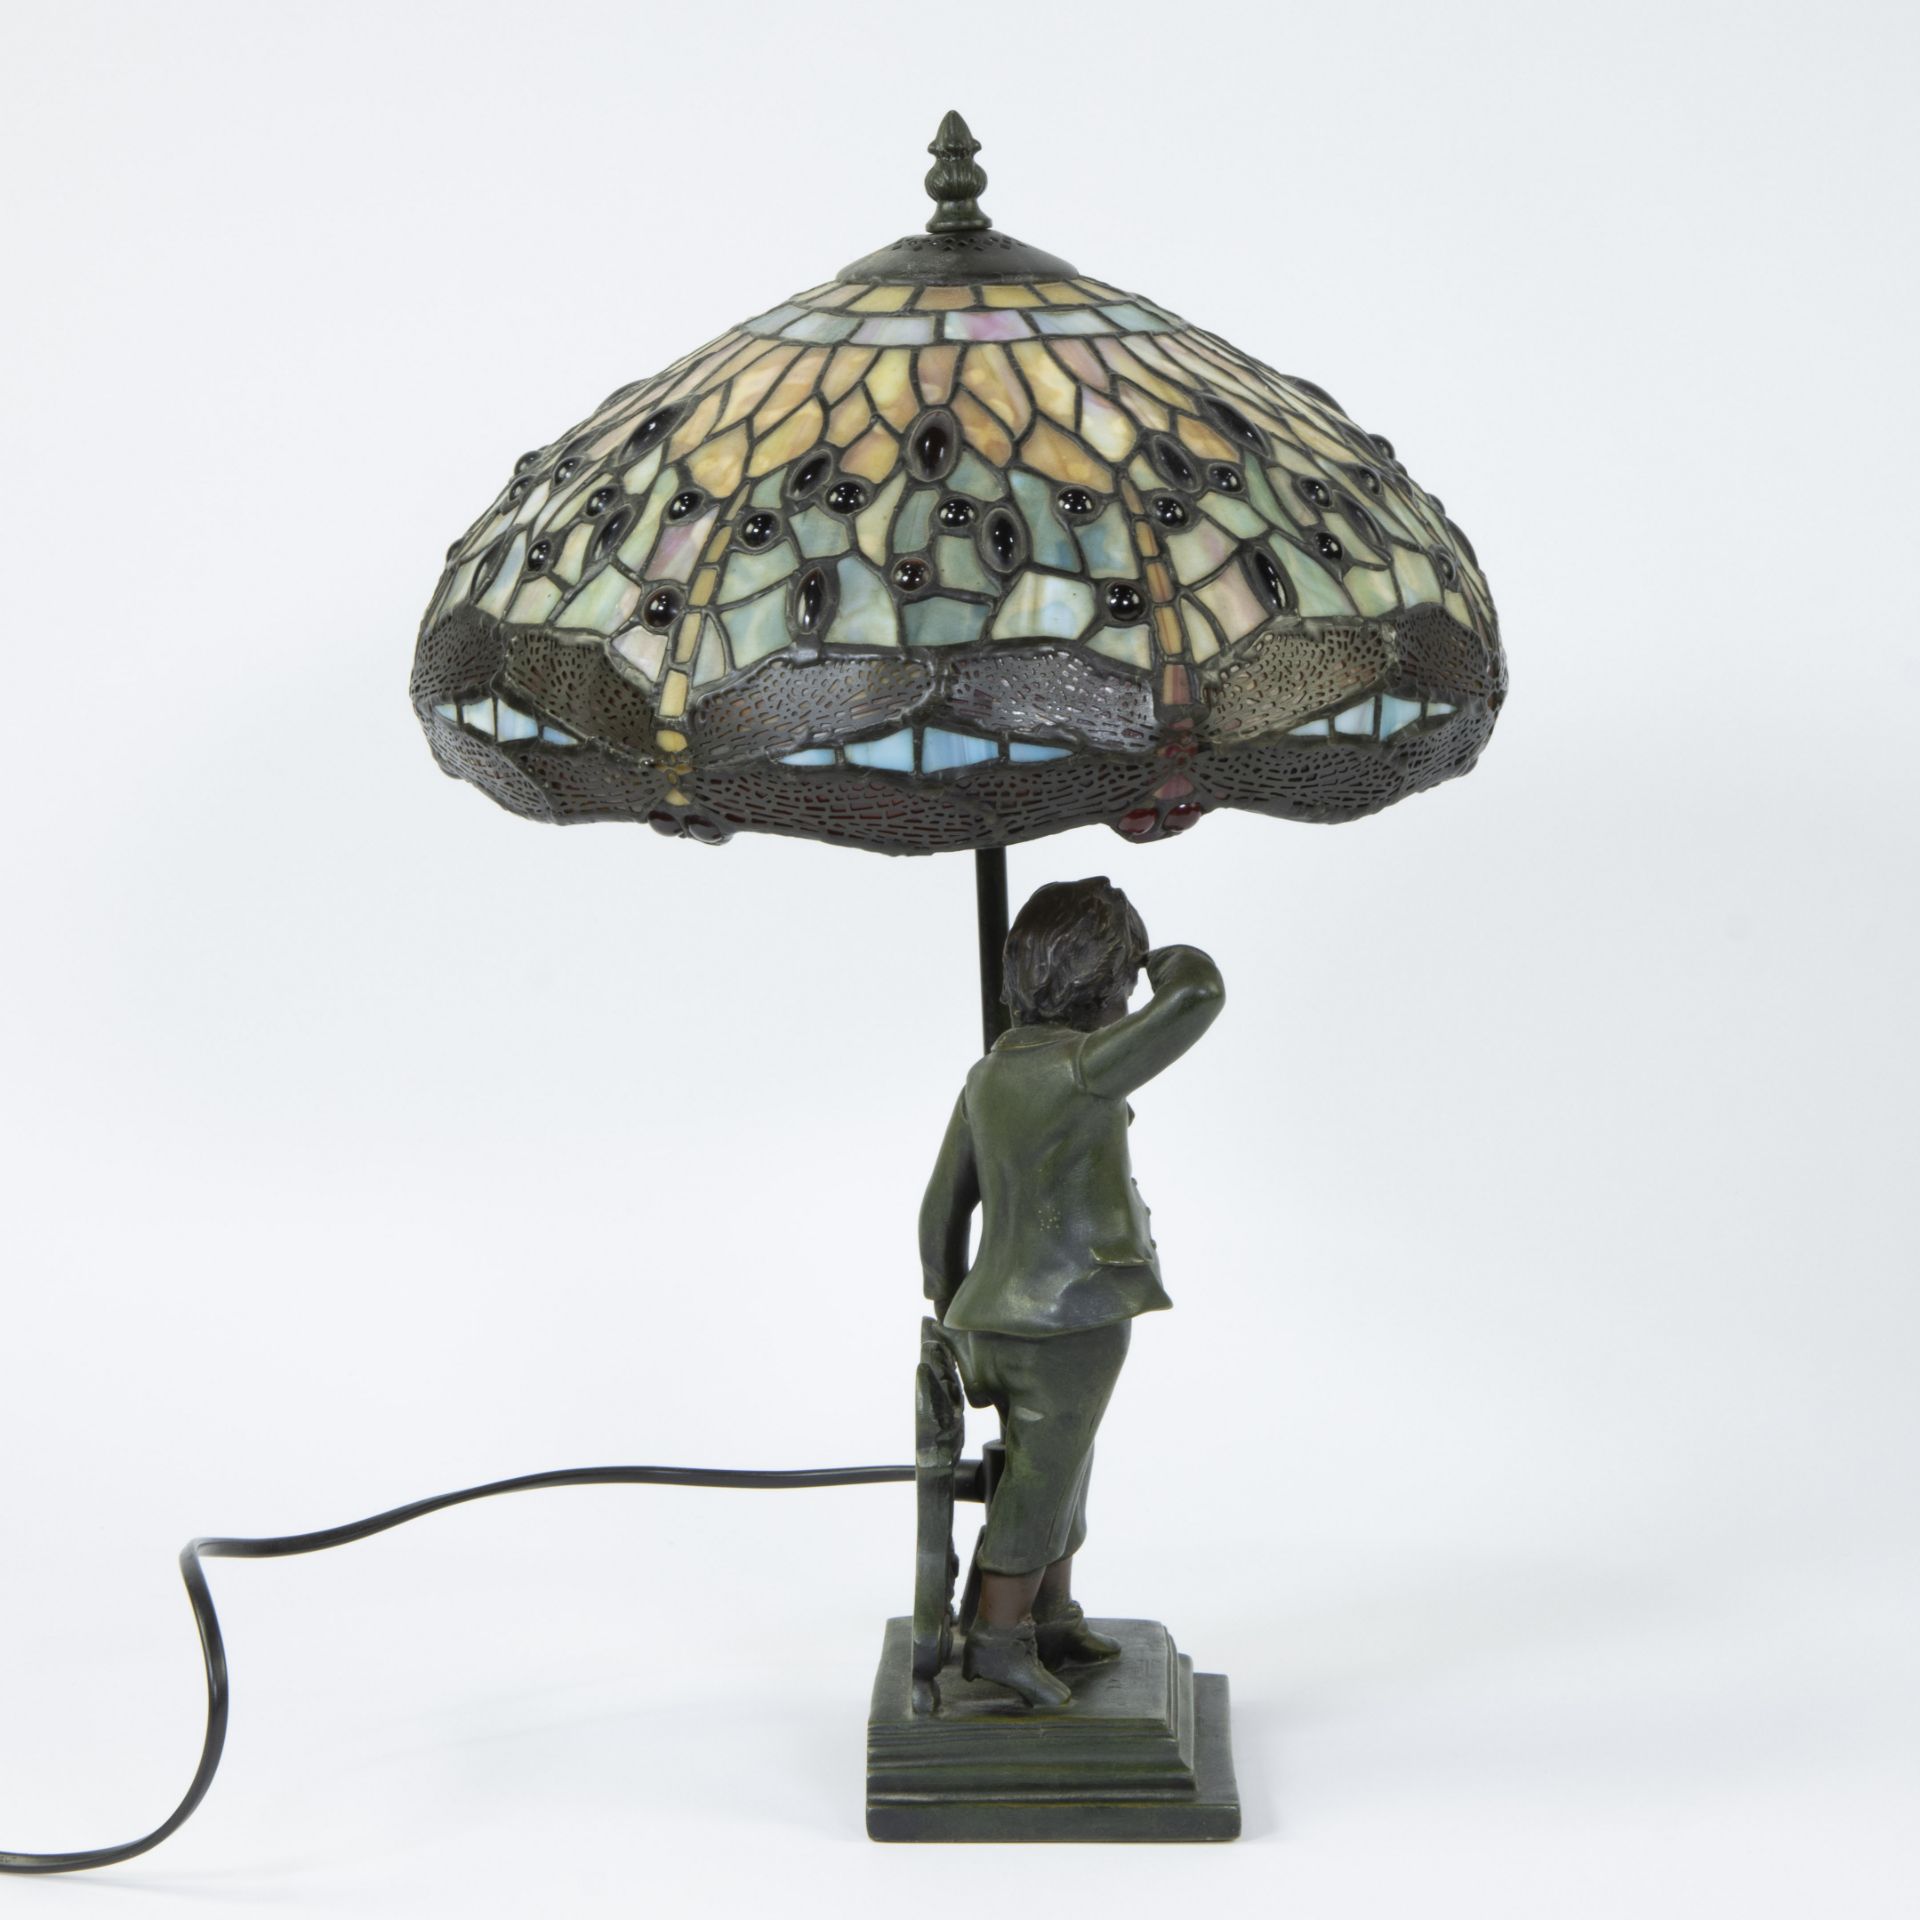 Tiffany-style lamp with decor of dragonflies - Image 2 of 5